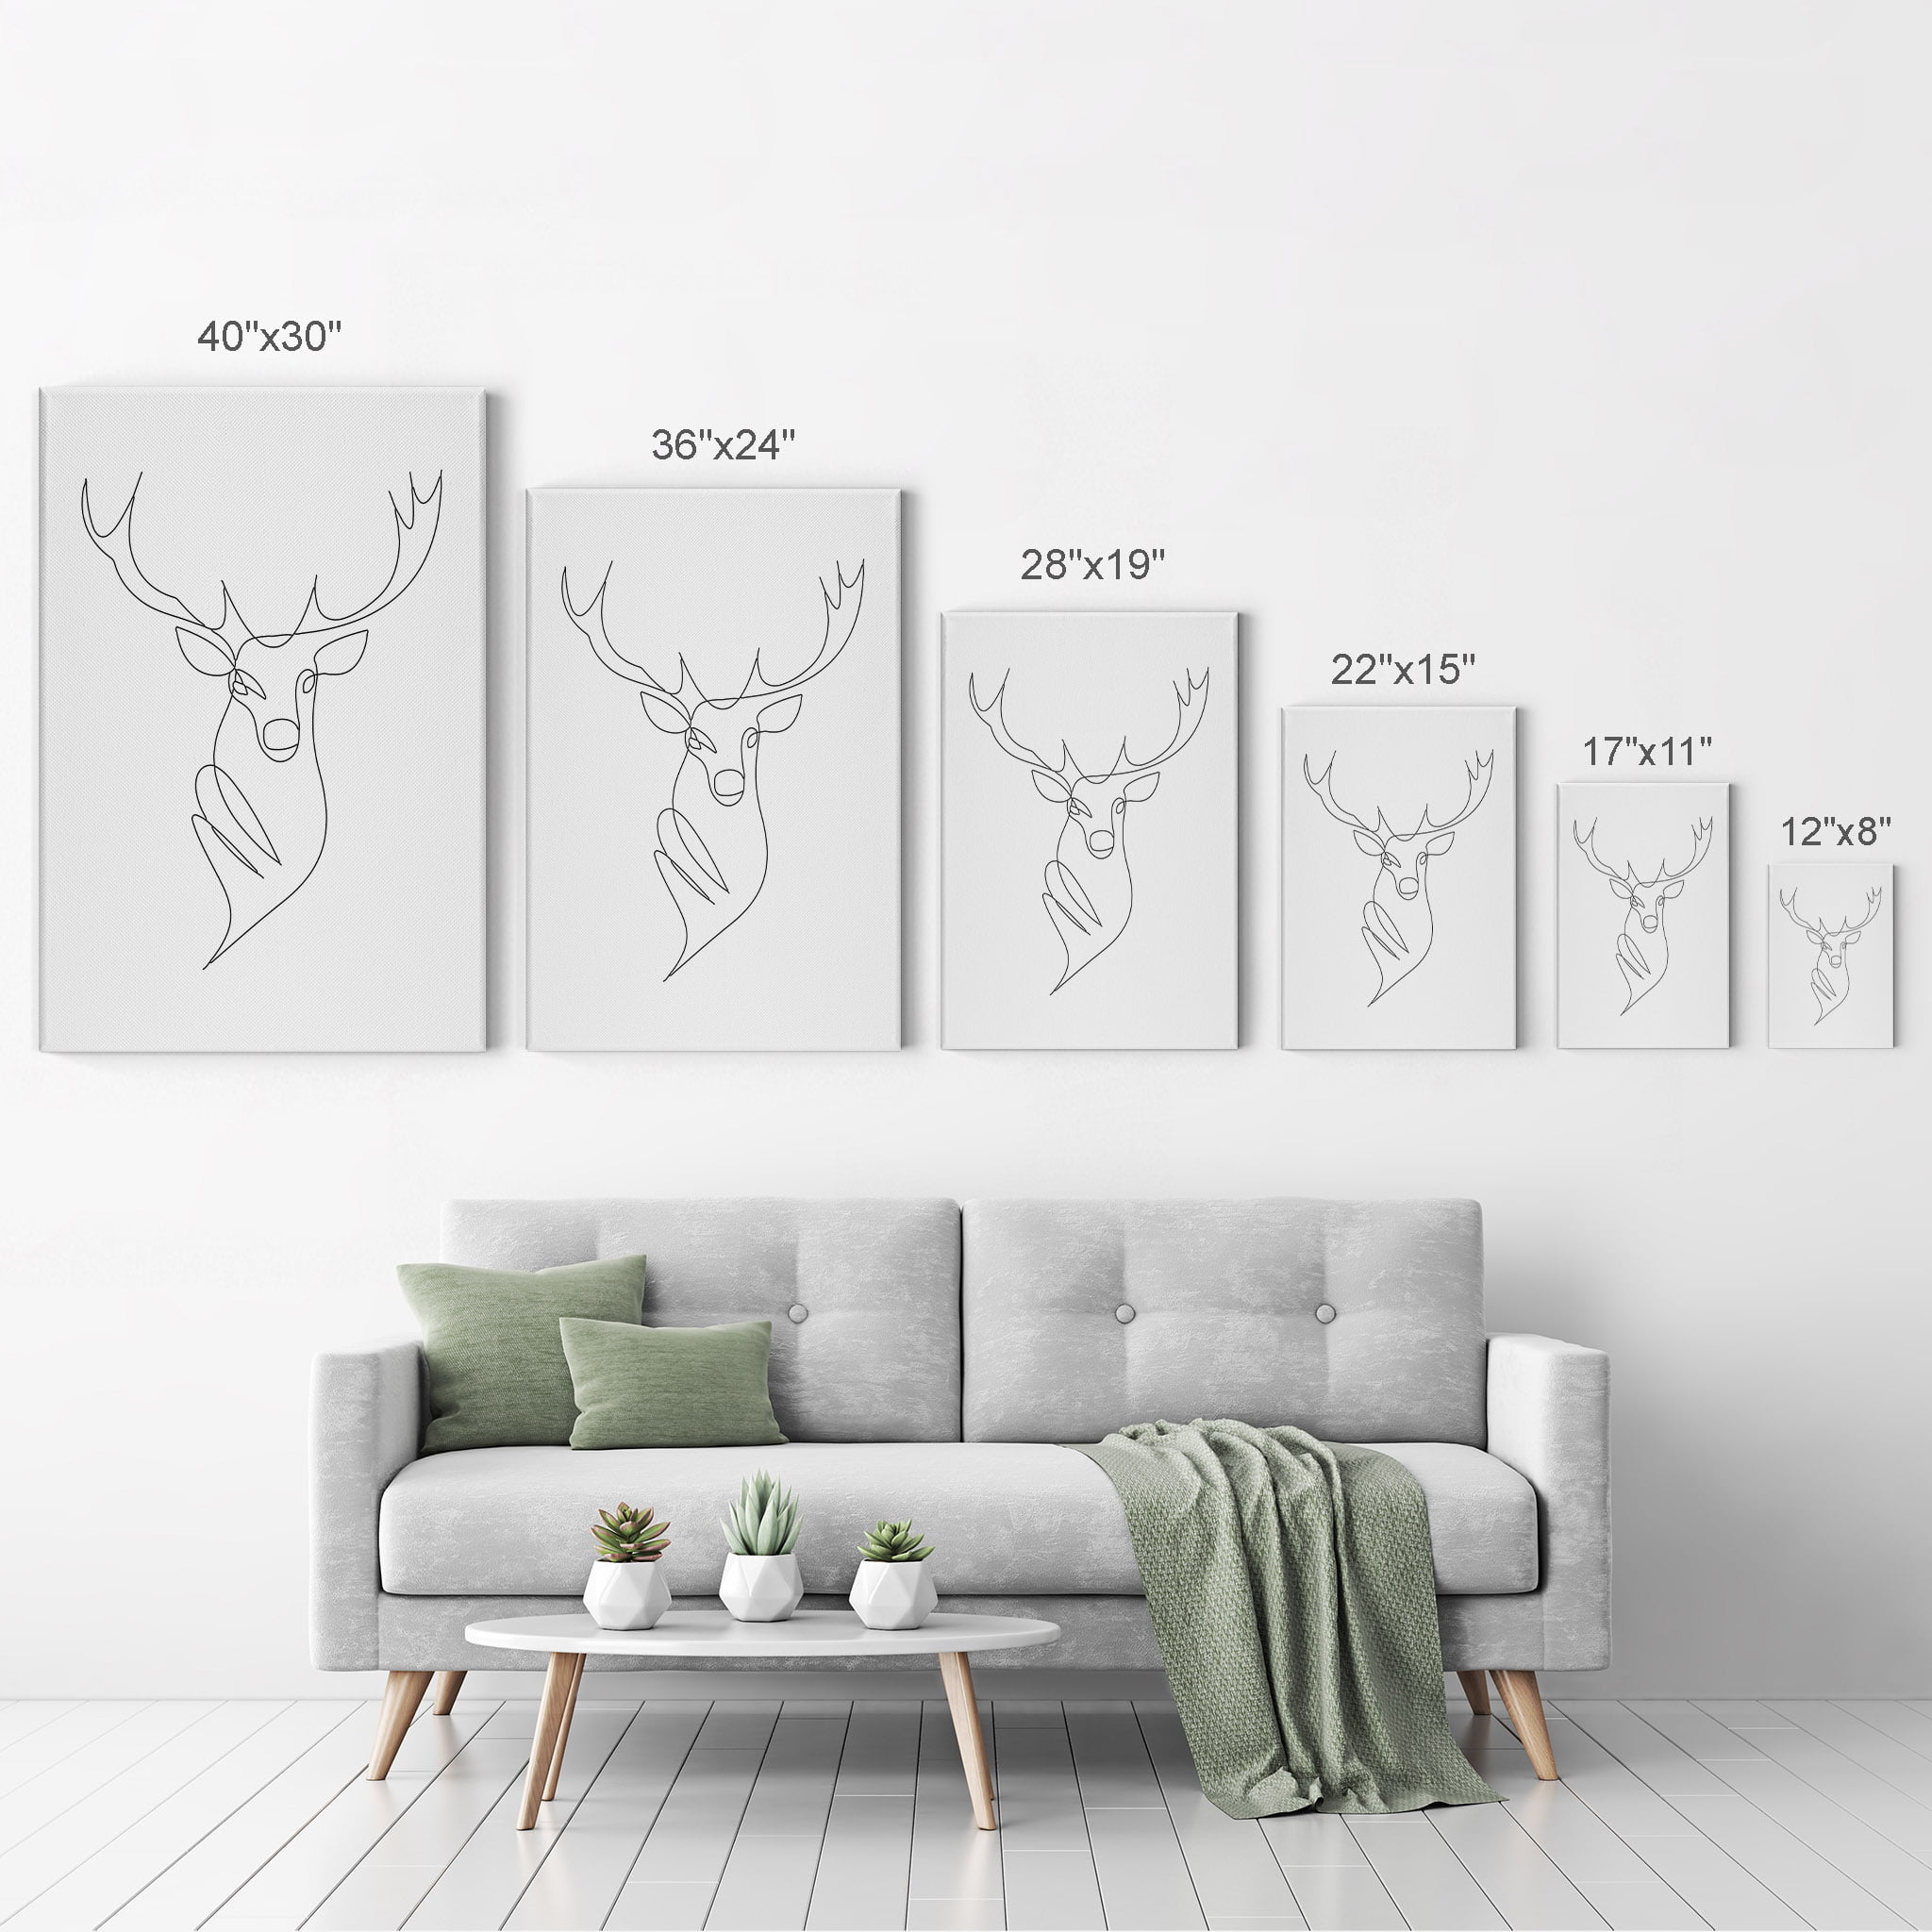 Smile Art Design Black Art Living Aesthetic Minimalism Home 40x30 - Animal Deer Abstract Bust Dorm Modern One Print Line Art Canvas Bedroom Wall Decor Room and Office White